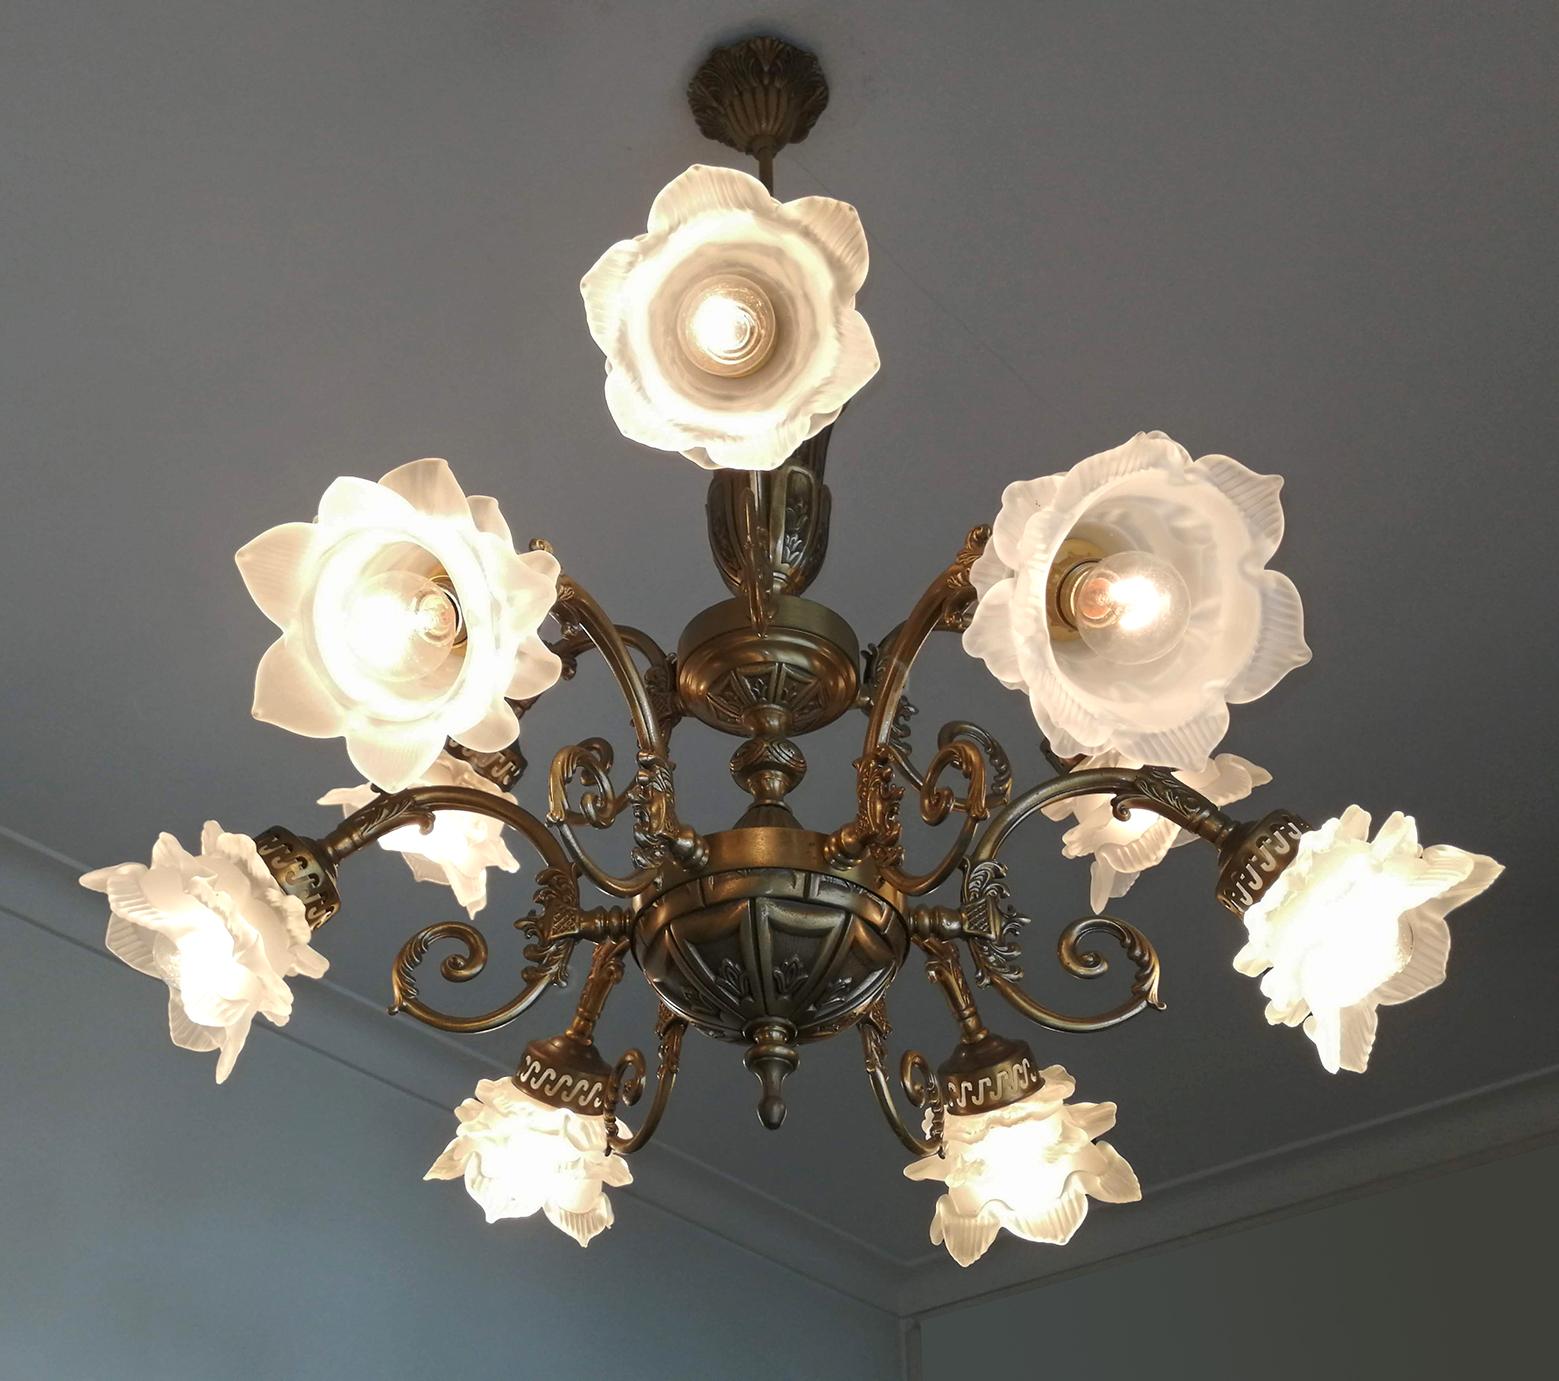 Frosted French Art Nouveau or Art Deco Art Glass Flower & Gilt Brass 9-Light Chandelier For Sale